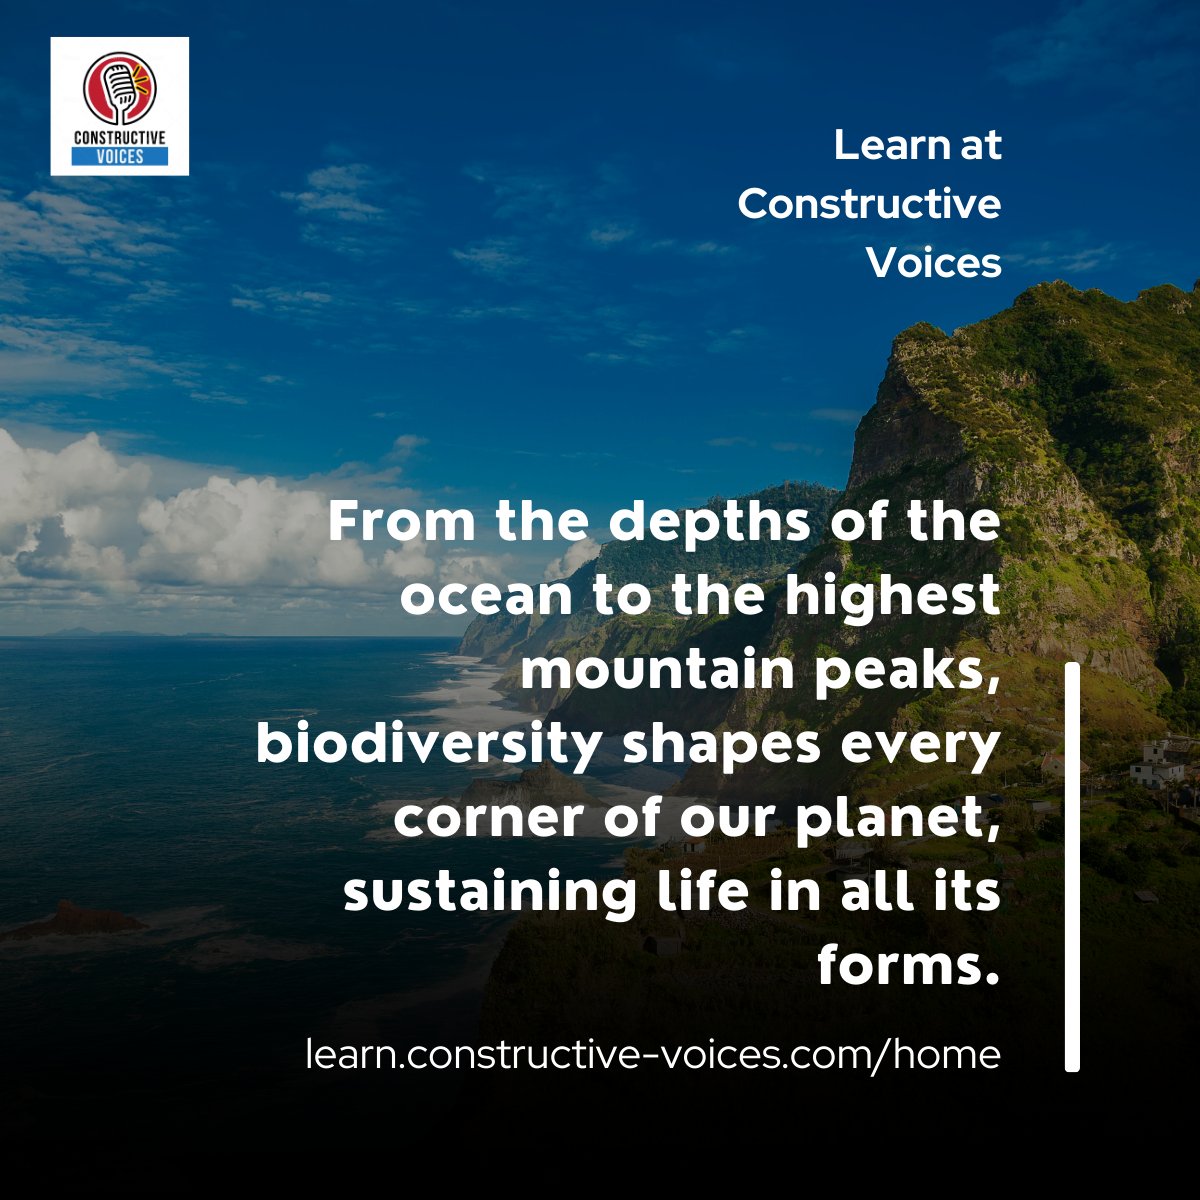 'From the depths of the ocean to the highest mountain peaks, biodiversity shapes every corner of our planet, sustaining life in all its forms.' #biodiversity #biodiversitynetgain #training - learn.constructive-voices.com/home/